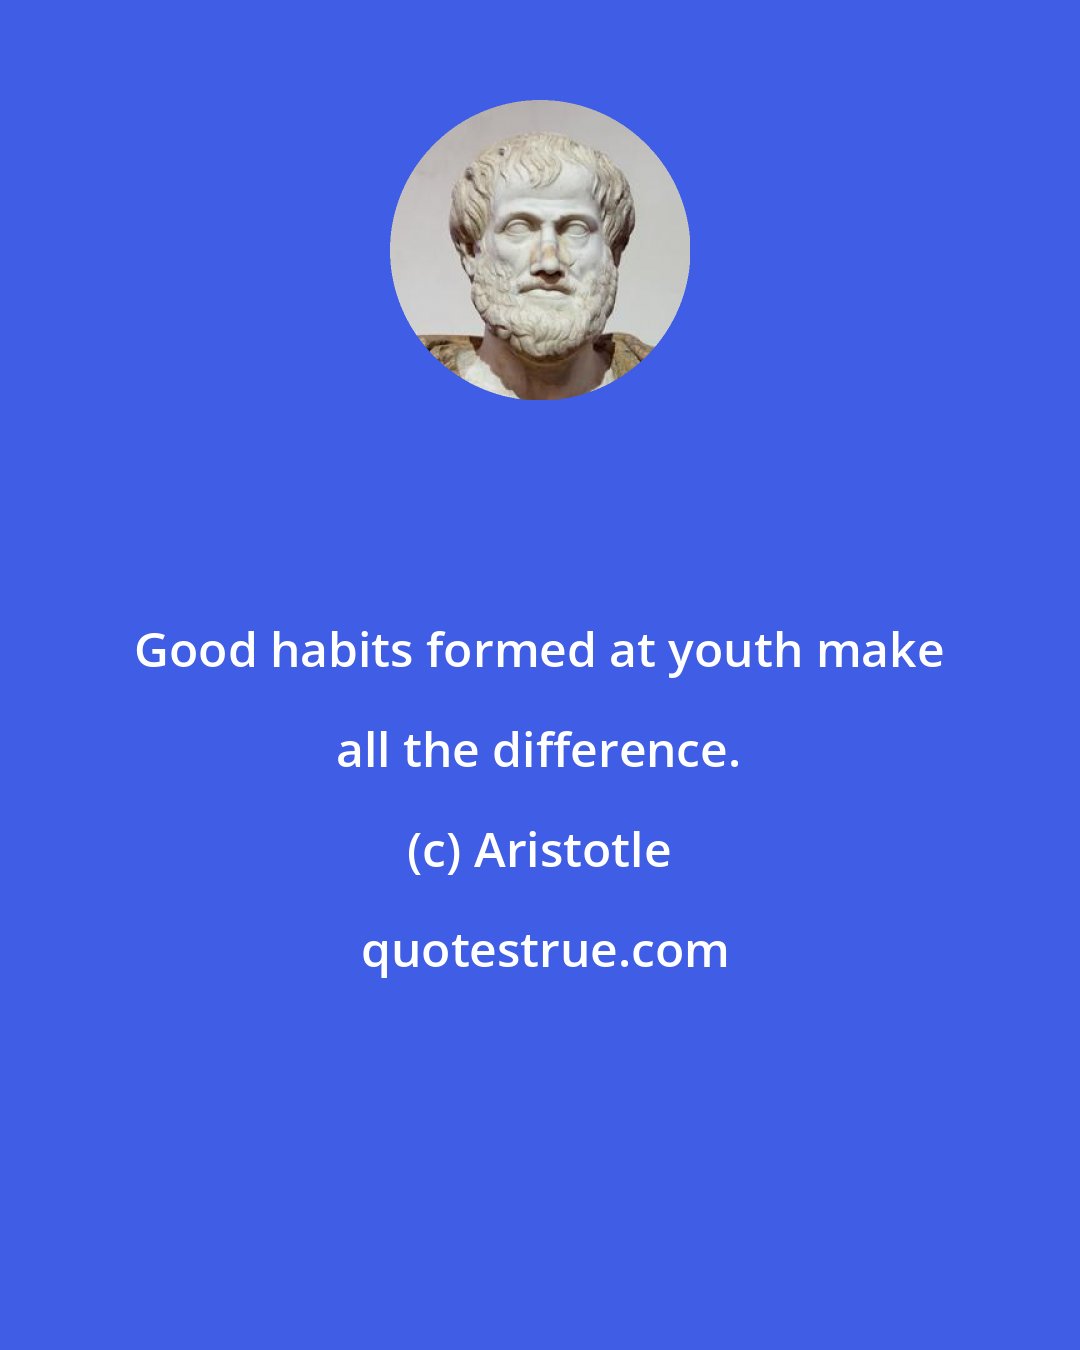 Aristotle: Good habits formed at youth make all the difference.